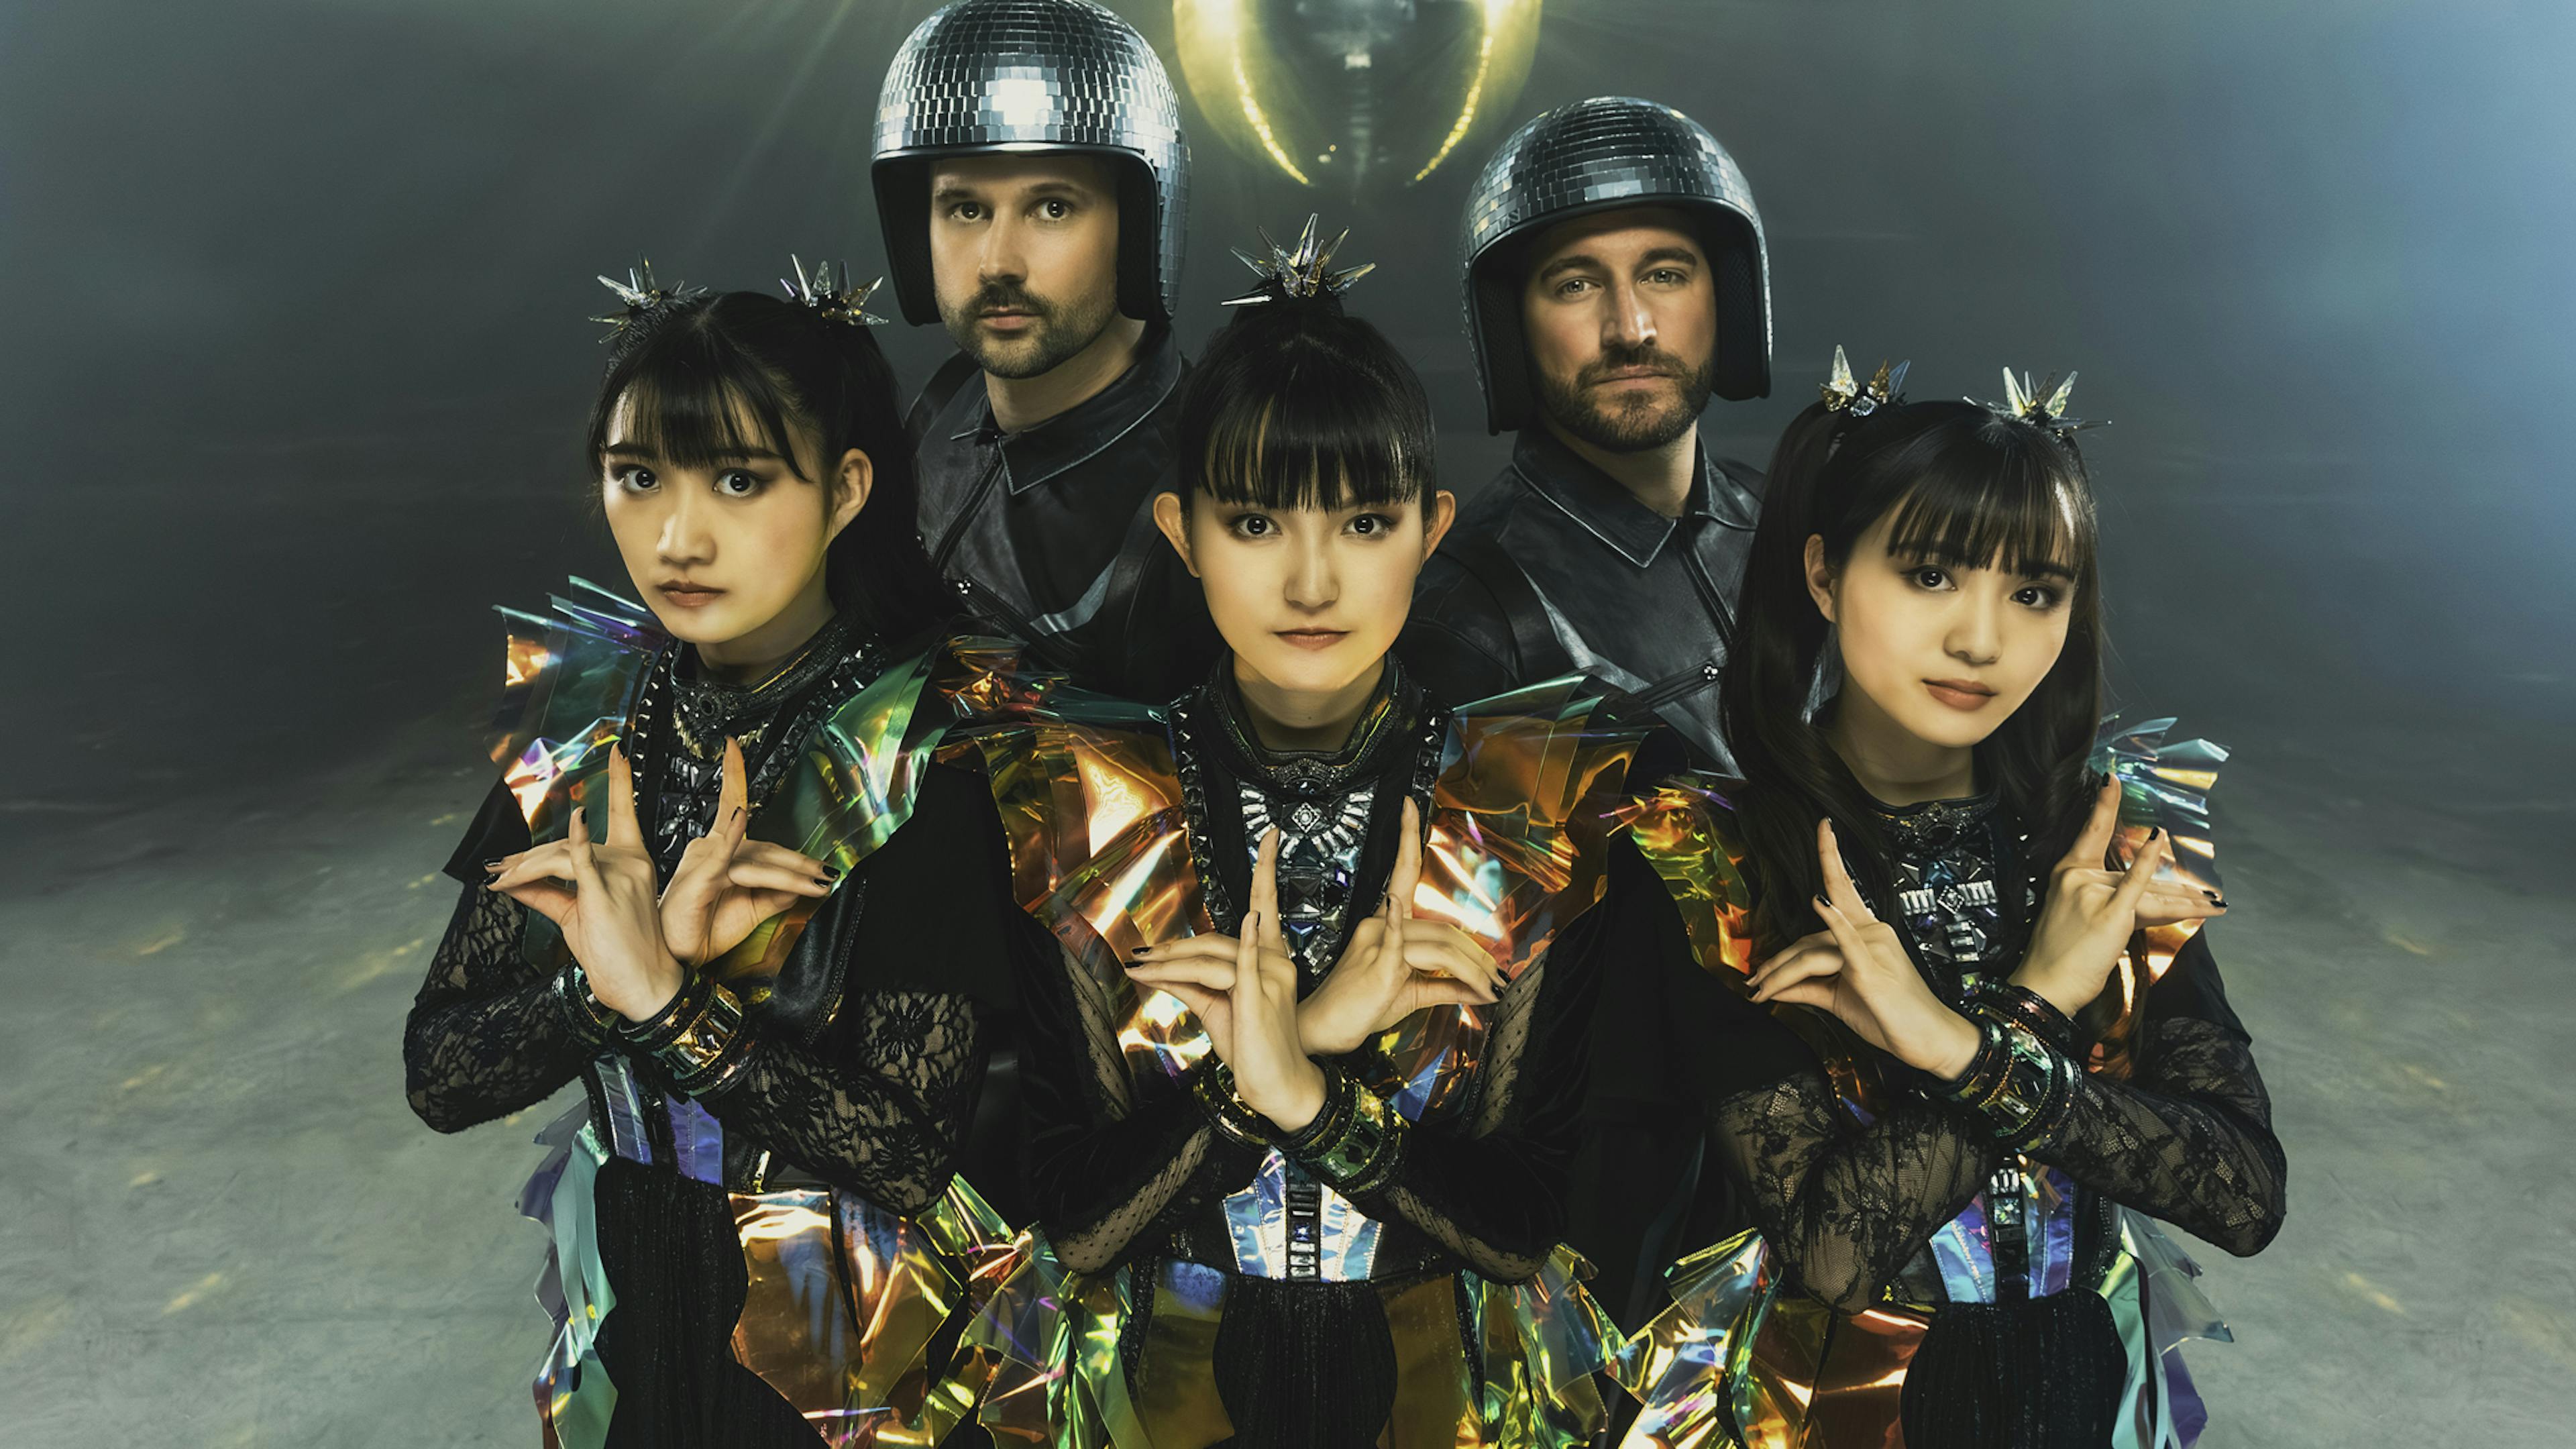 BABYMETAL and Electric Callboy release new single RATATATA: “We brought together the best of both worlds”